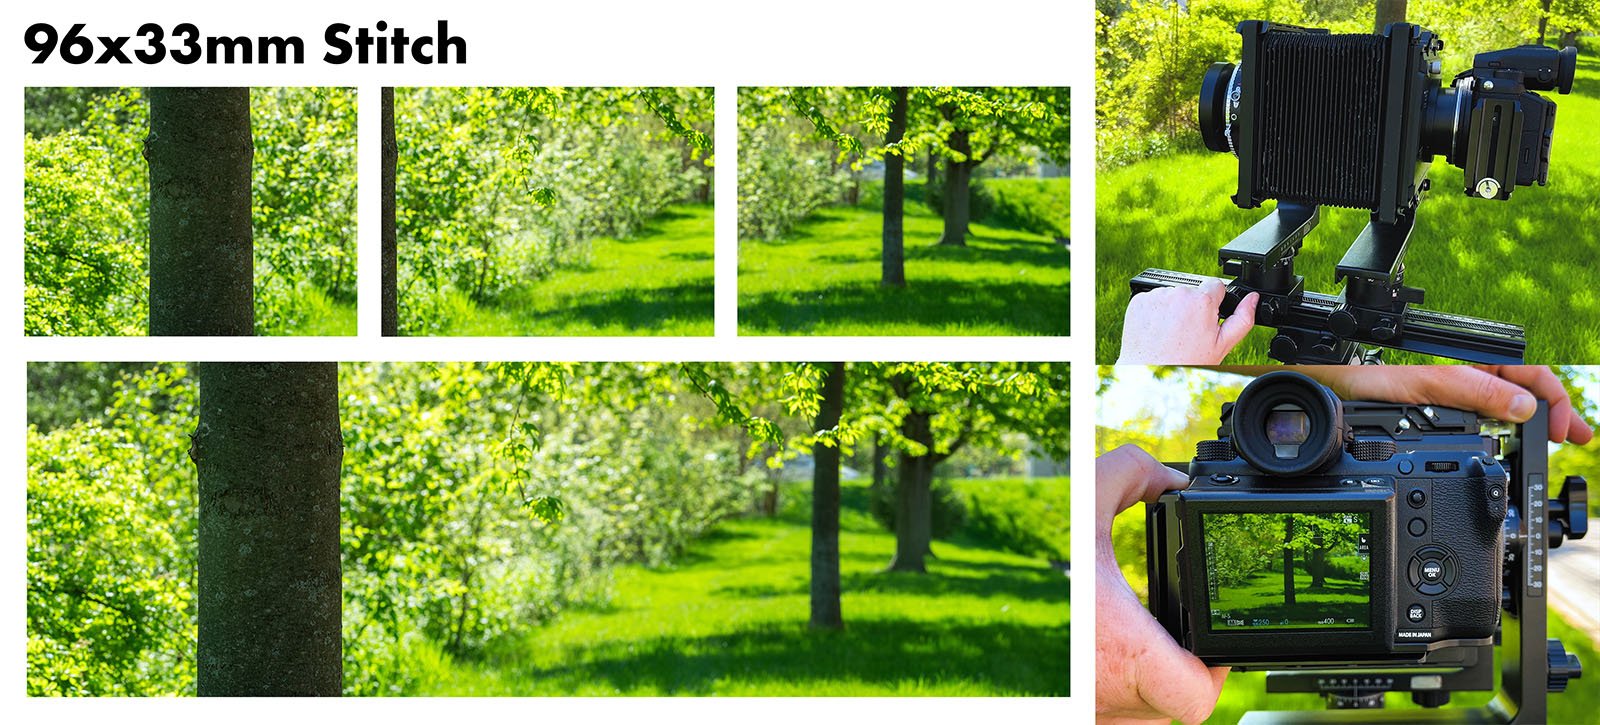 A composite image showing six photographs of a lush green park with trees, with close-ups and wide shots. two images display cameras capturing the scenes, one a dslr and the other a vintage camera.